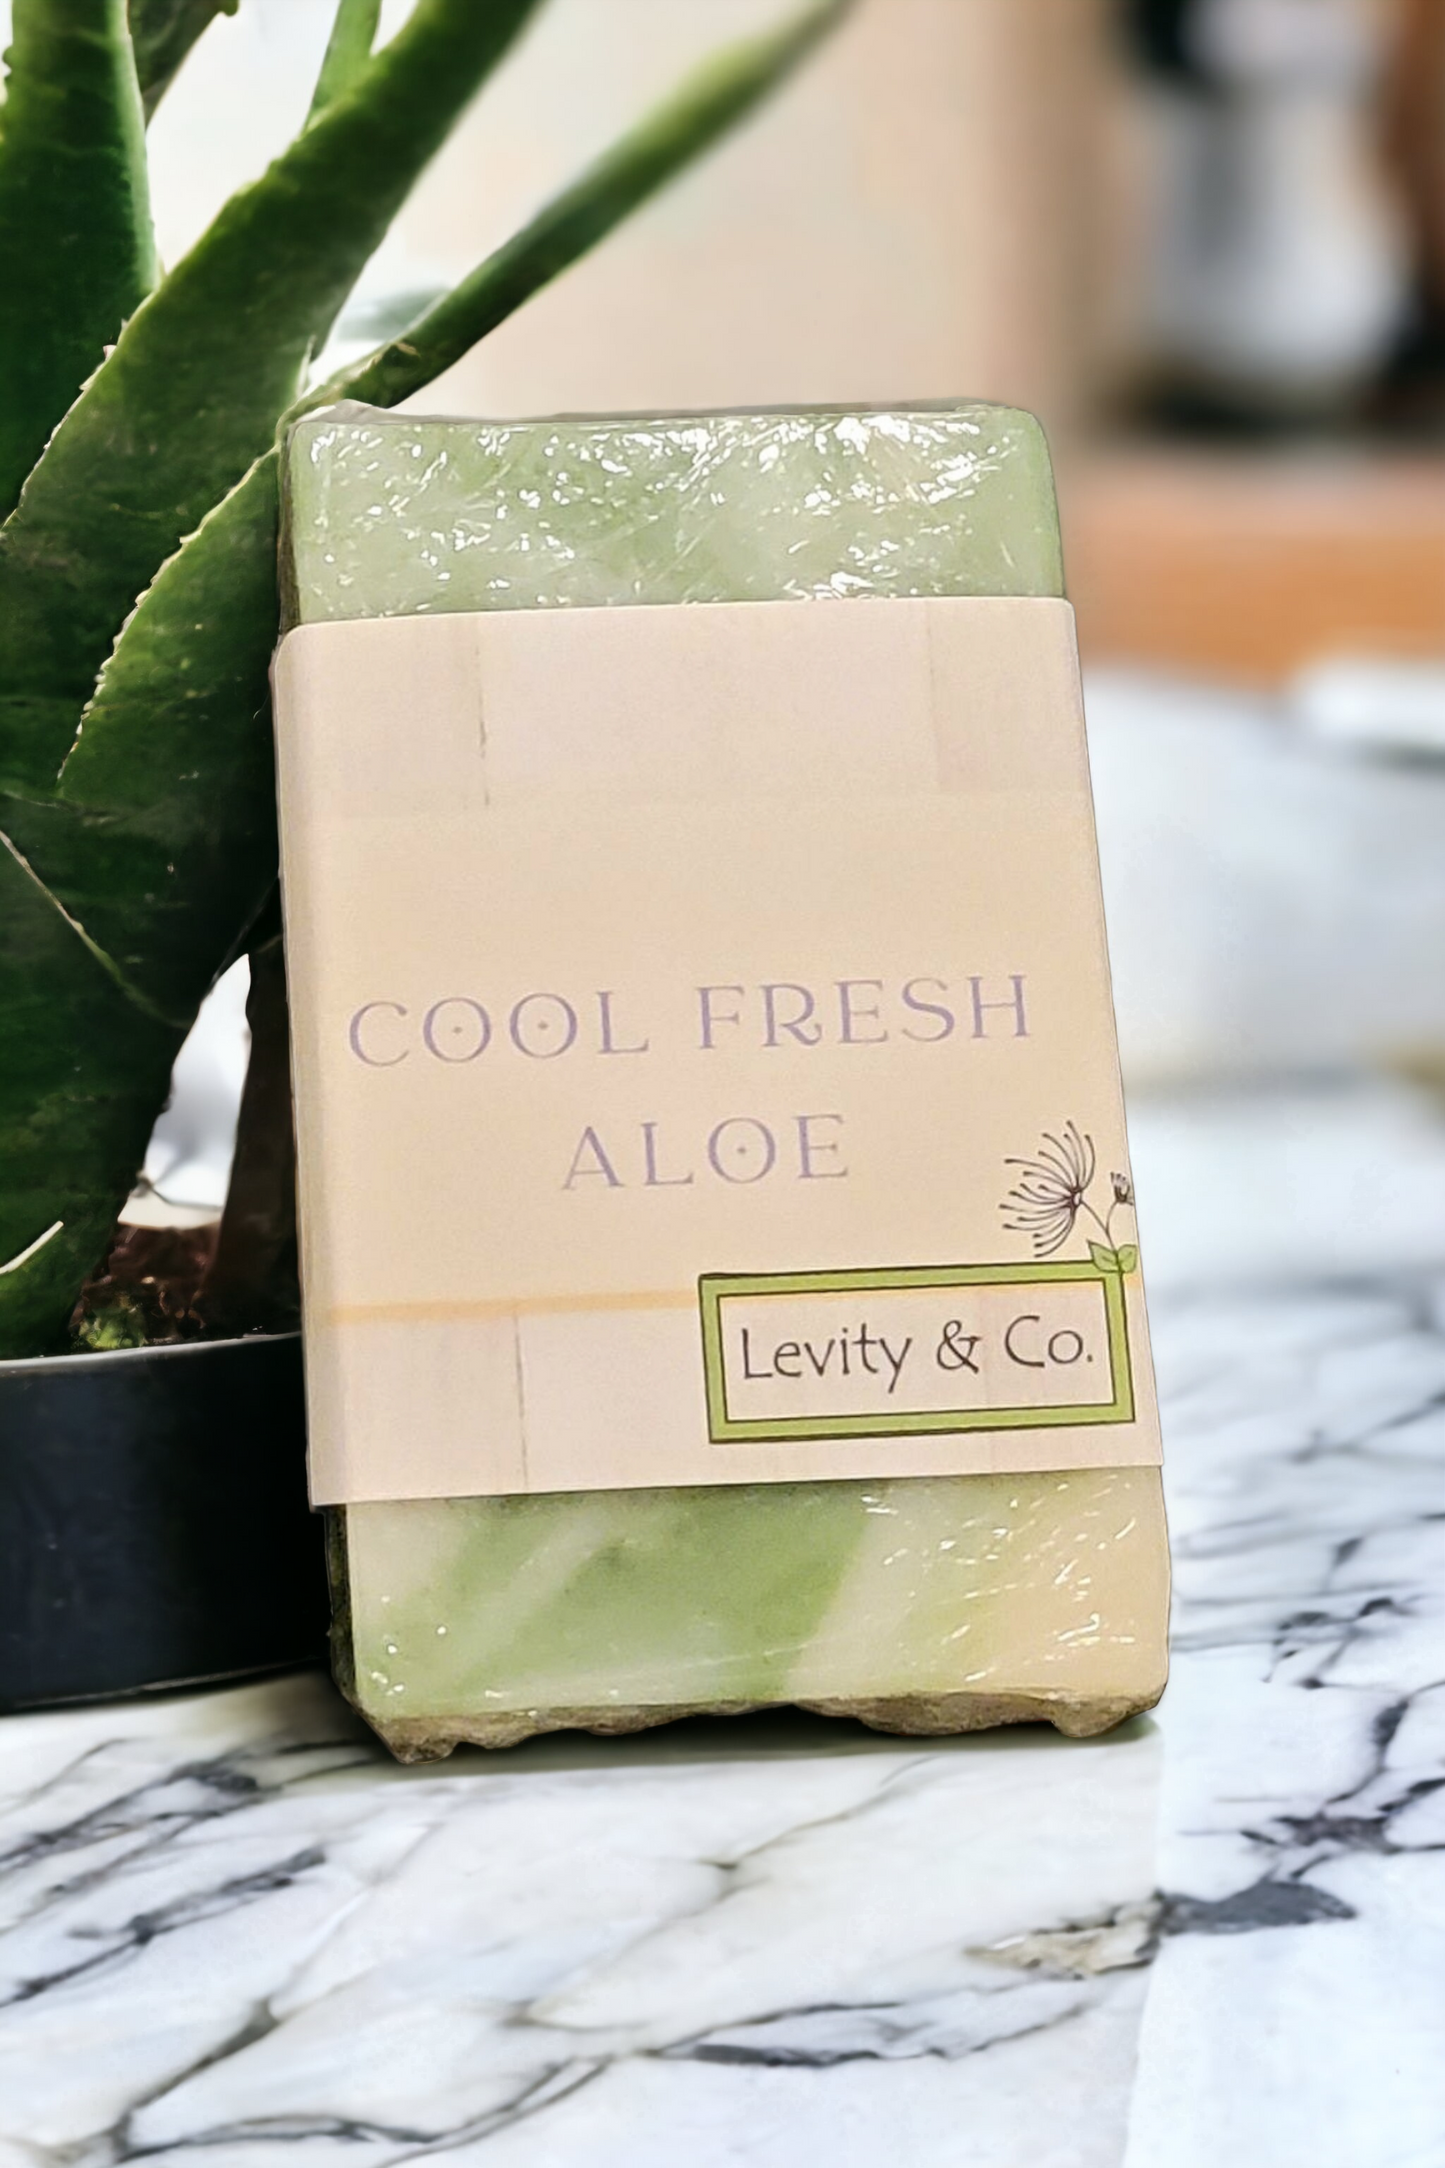 Cold Pressed Soaps, buy 3 get 1 free